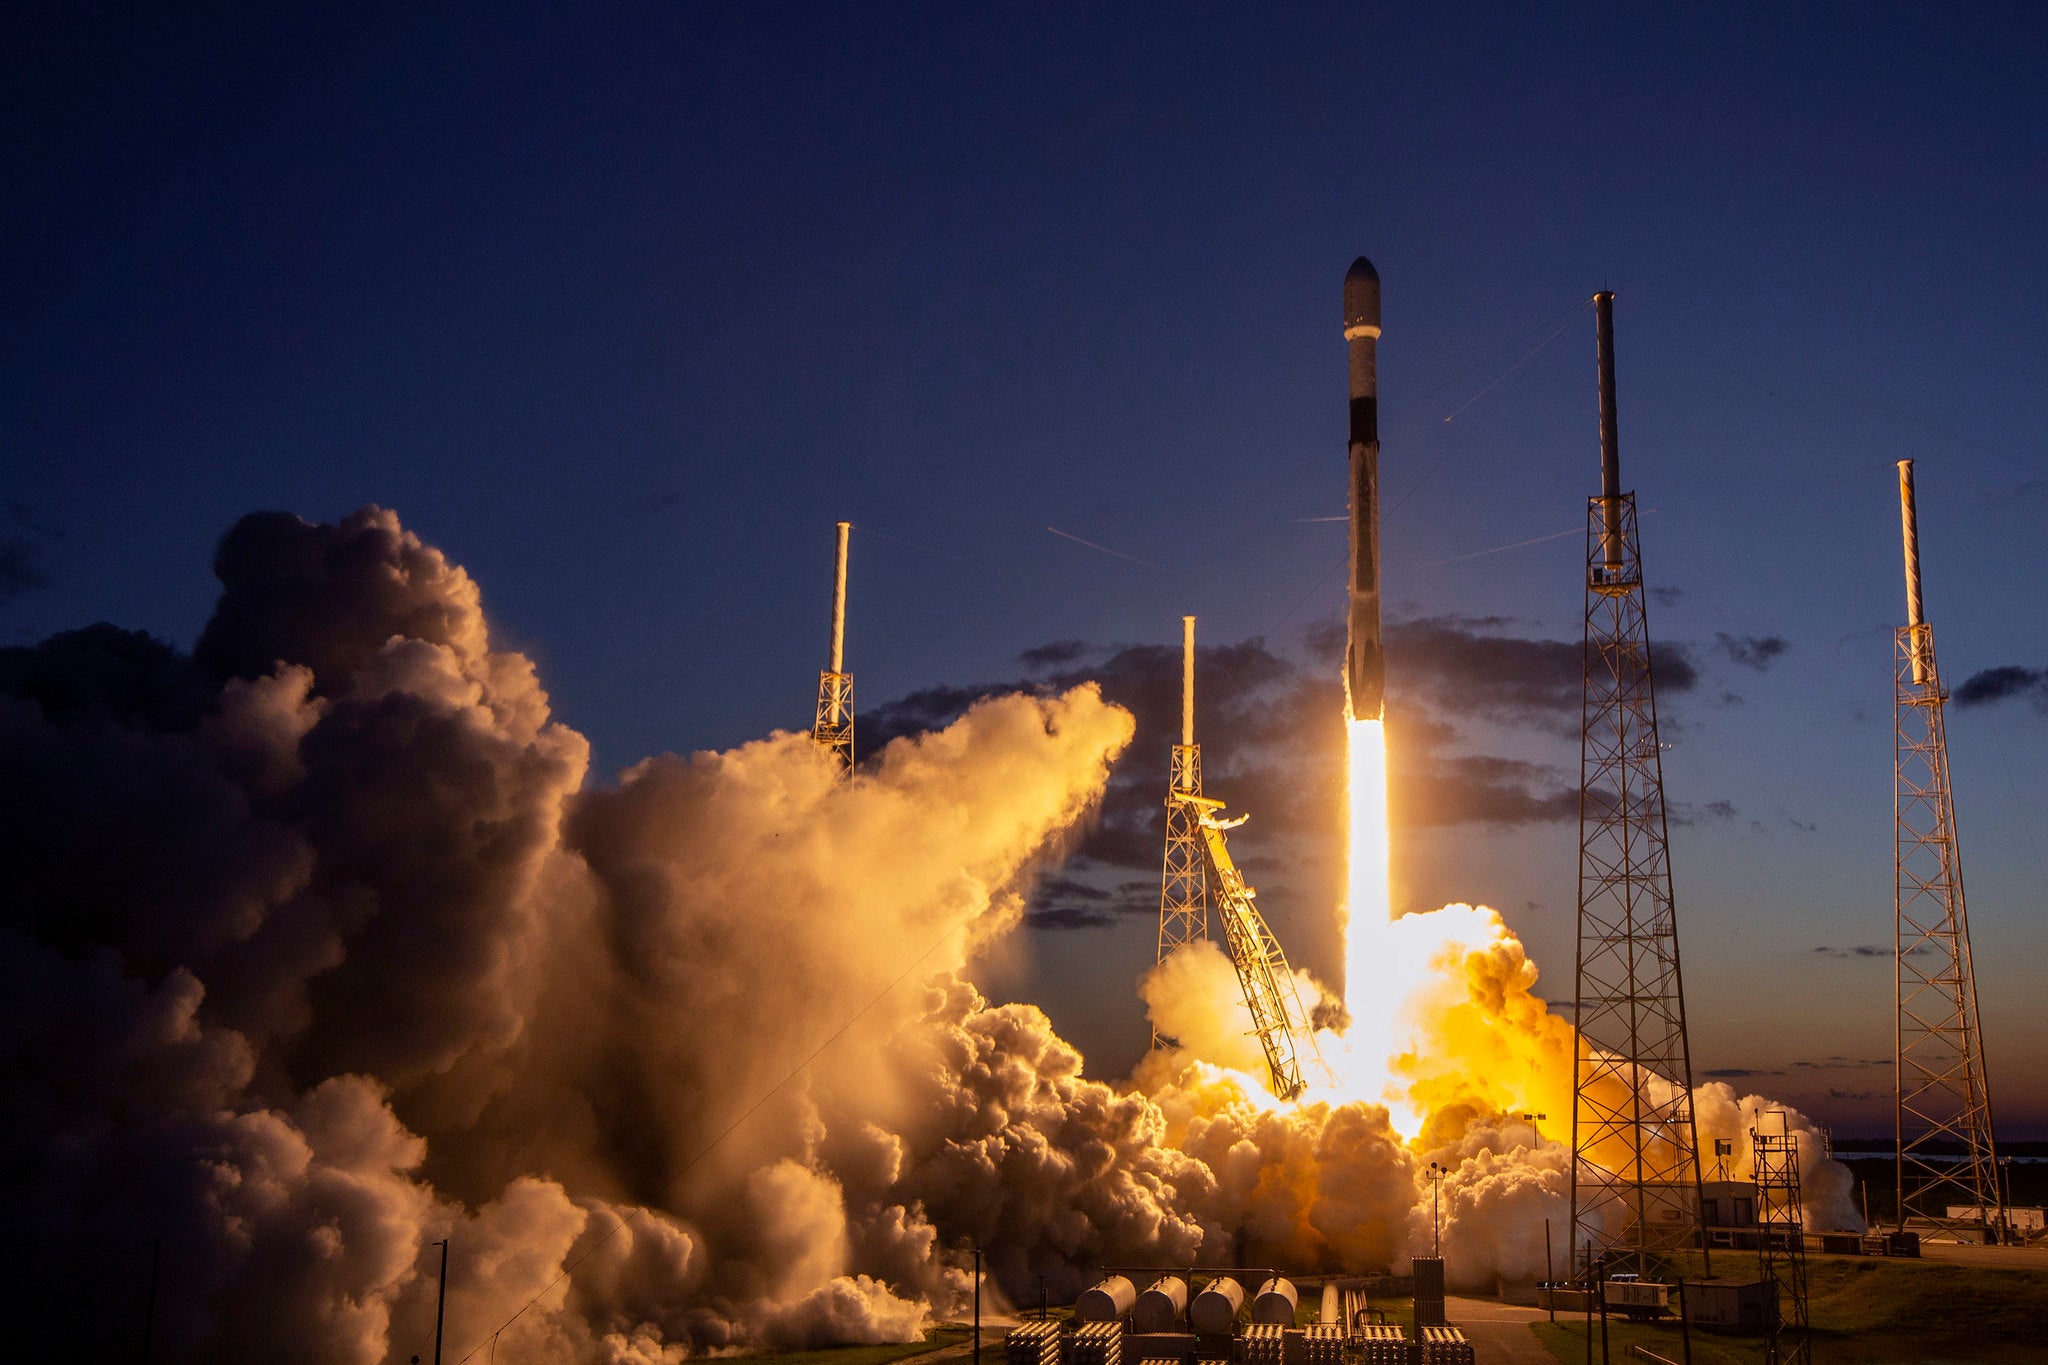 Launch of SpaceX Falcon 9 for Intelesat G-33/G-34 mission on October 8, 2022. (Photo: SpaceX)